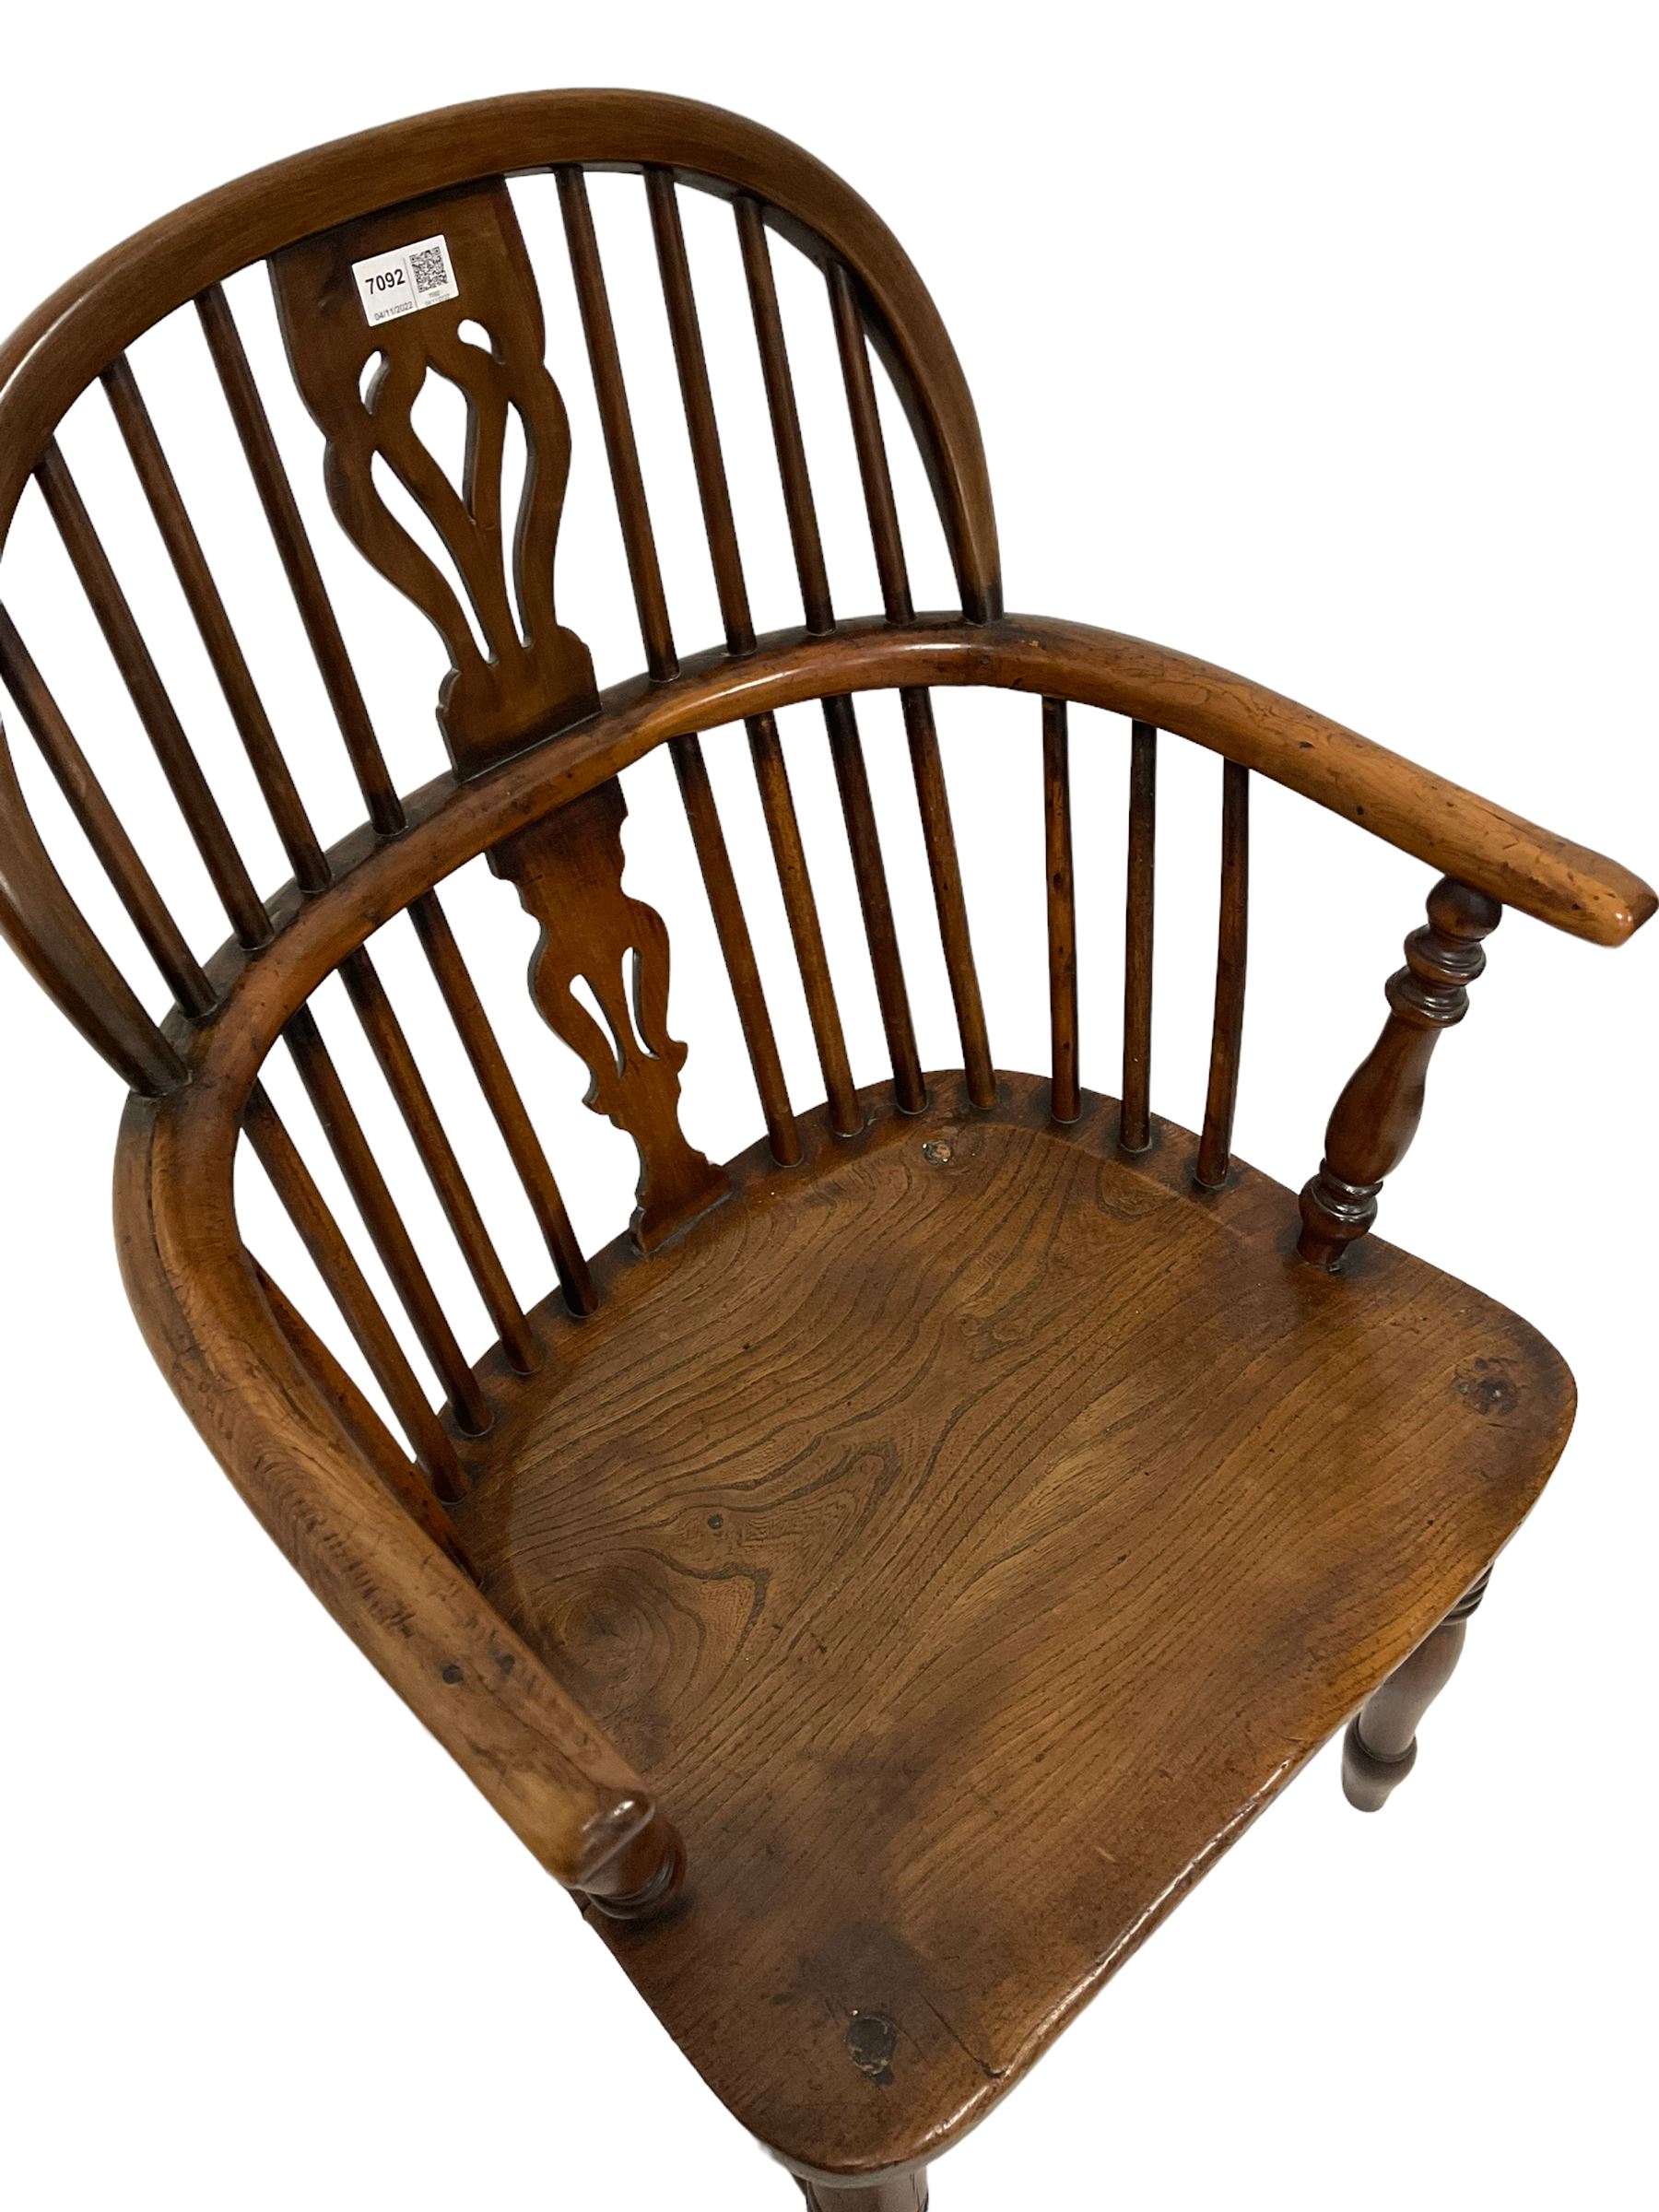 19th century elm and yew wood Windsor elbow chair - Image 2 of 4